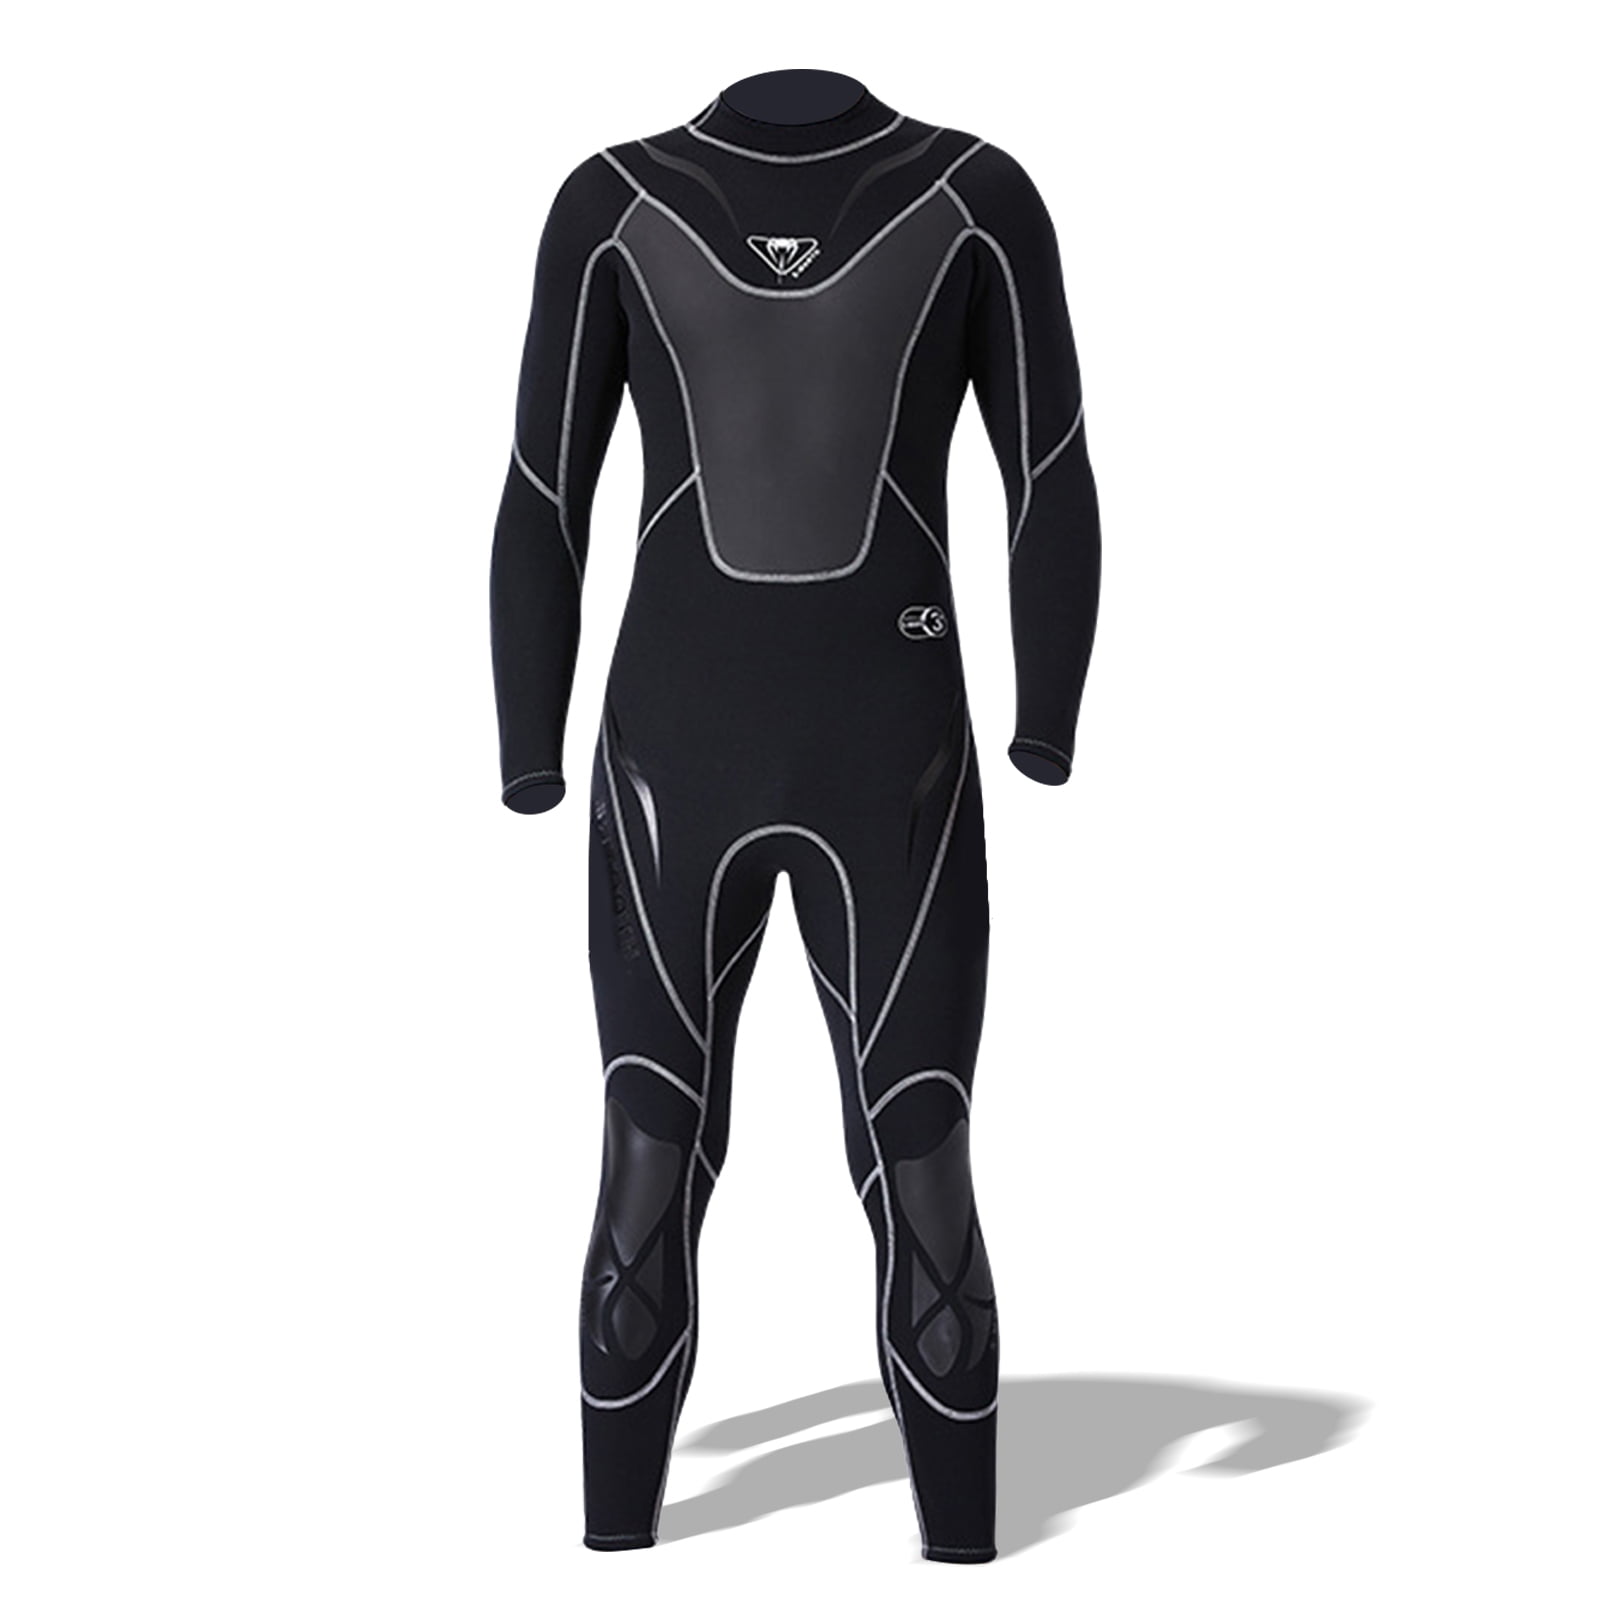 Wetsuit Women Men Full Body Wet Suit 3MM Neoprene Surfing Scuba Diving Suits One Piece Long Sleeve Wetsuits Back Zip Thermal Swimsuit for Swimming Snorkeling Kayaking Cold Water Sports 